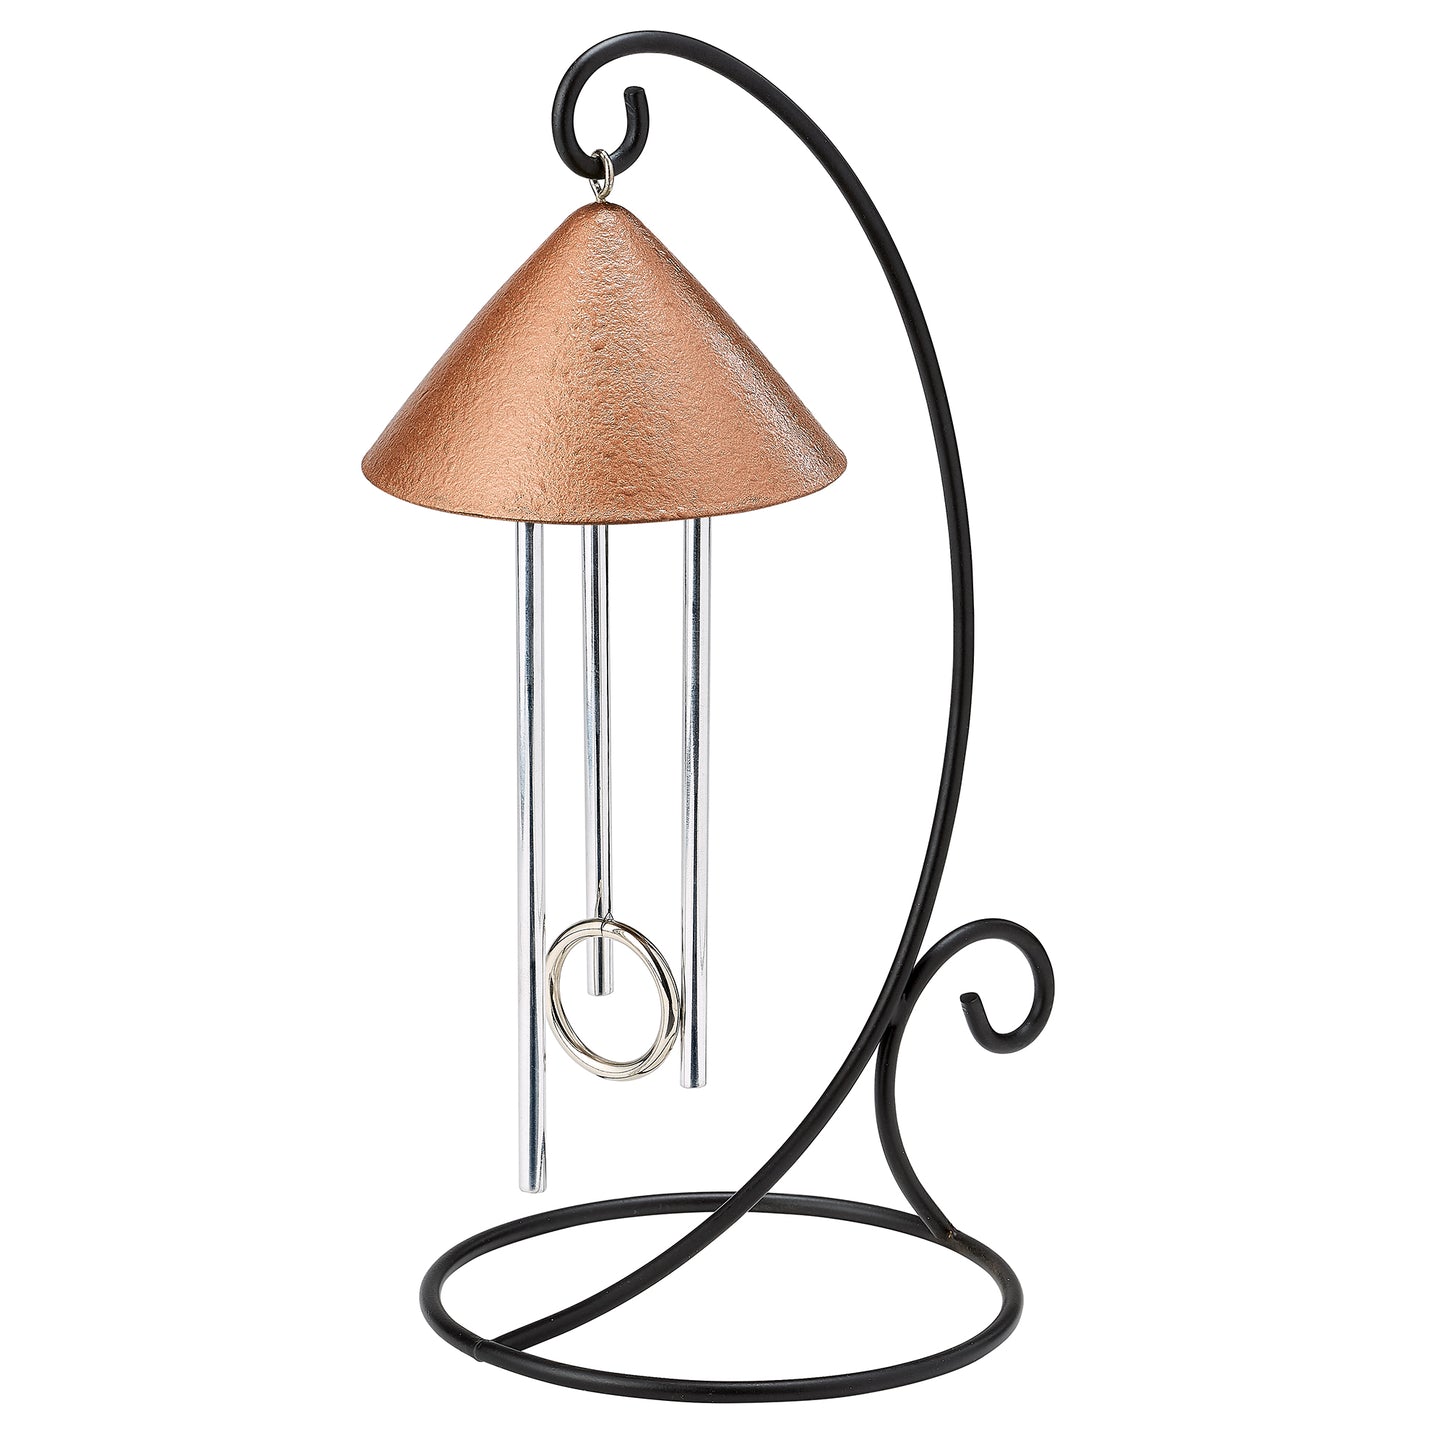 Indoor Tabletop solar wind chime in hammered copper color made in US